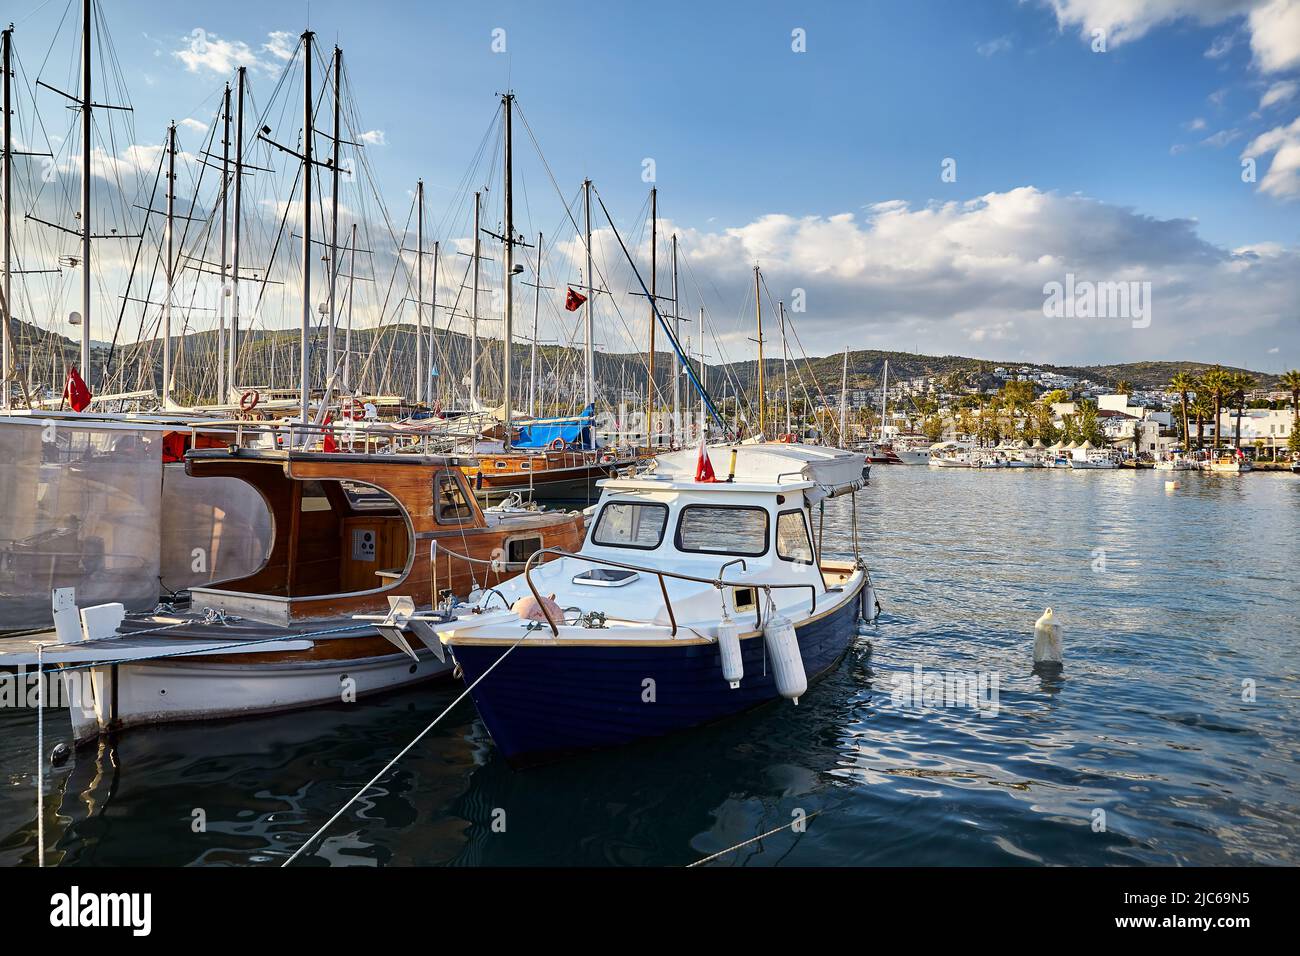 View of Bodrum Beach from Promenade. Sailing boats, yachts at Aegean sea with traditional white houses at hills in Bodrum port town Turkey Stock Photo